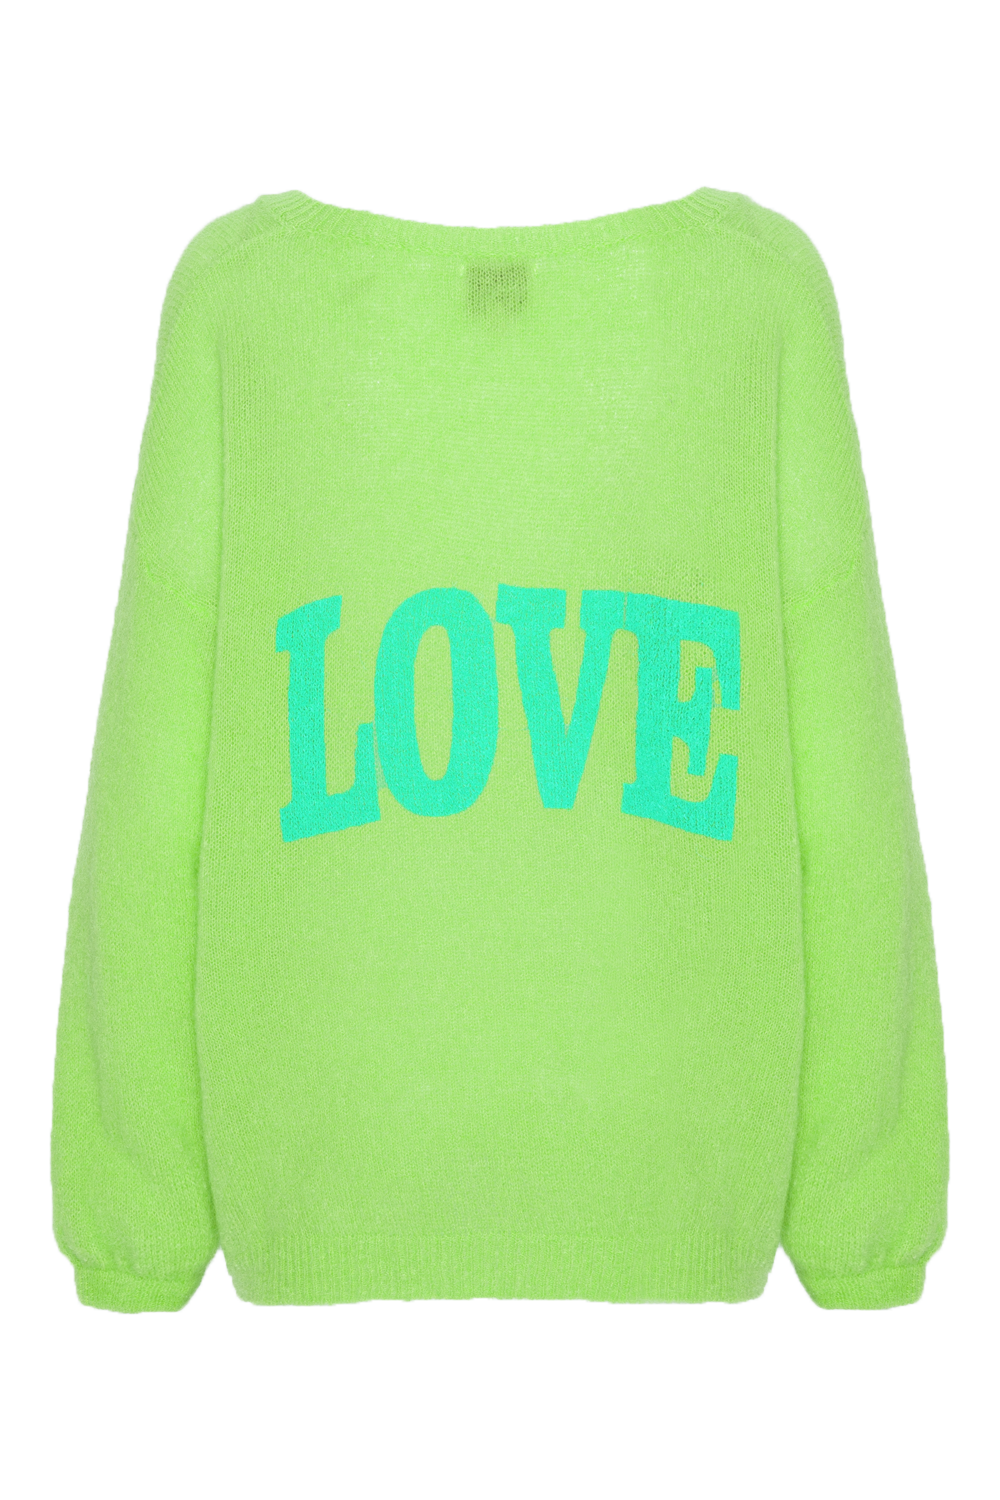 Silja Back Letters Lime Green W/ Turquoise Letters (LOVE)